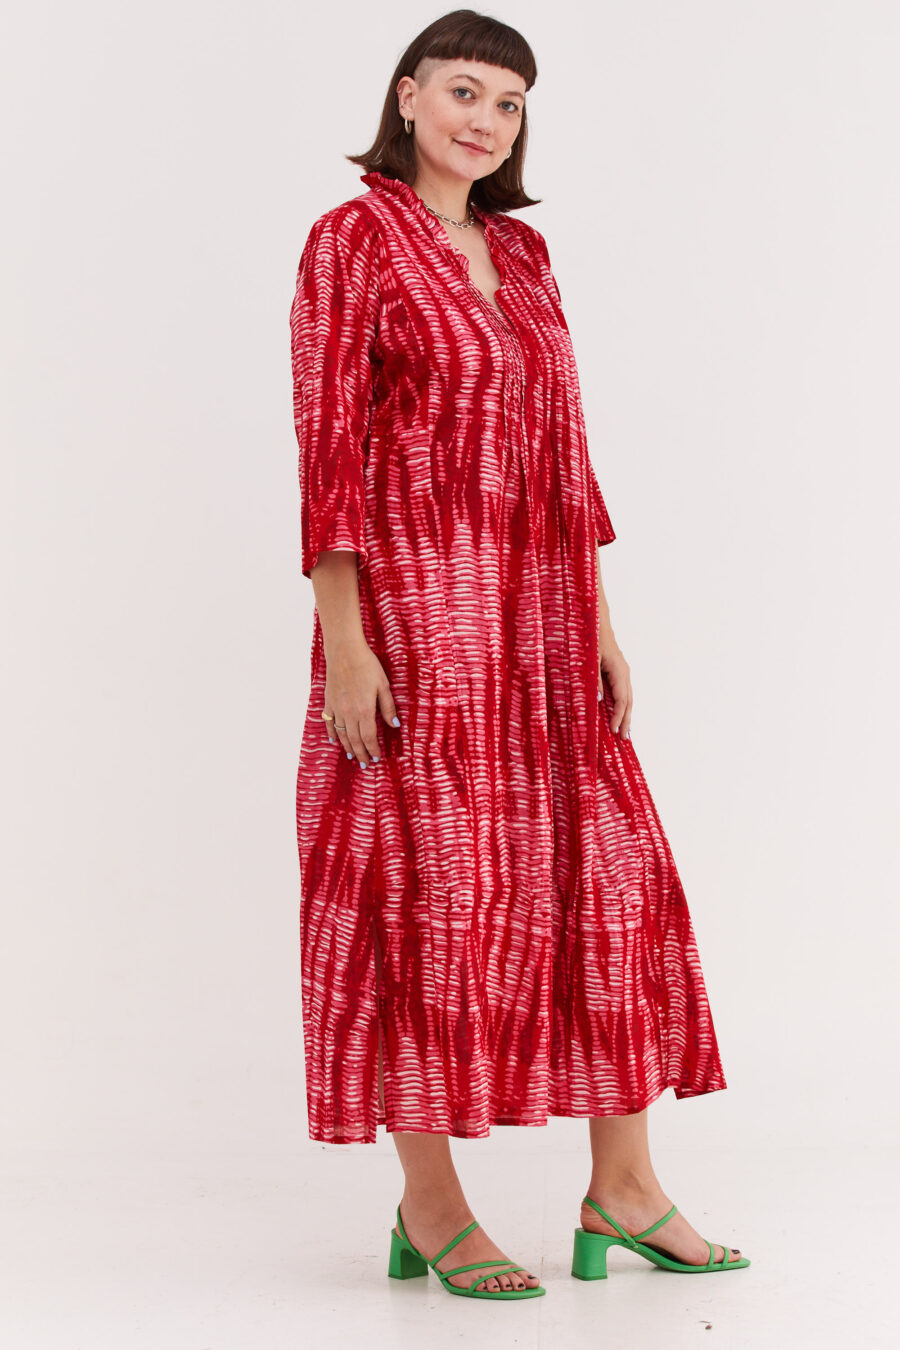 Jalabiya dress without sleeve | Uniquely designed dress - Stone red print, pink dress with red stone-like print by comfort zone boutique